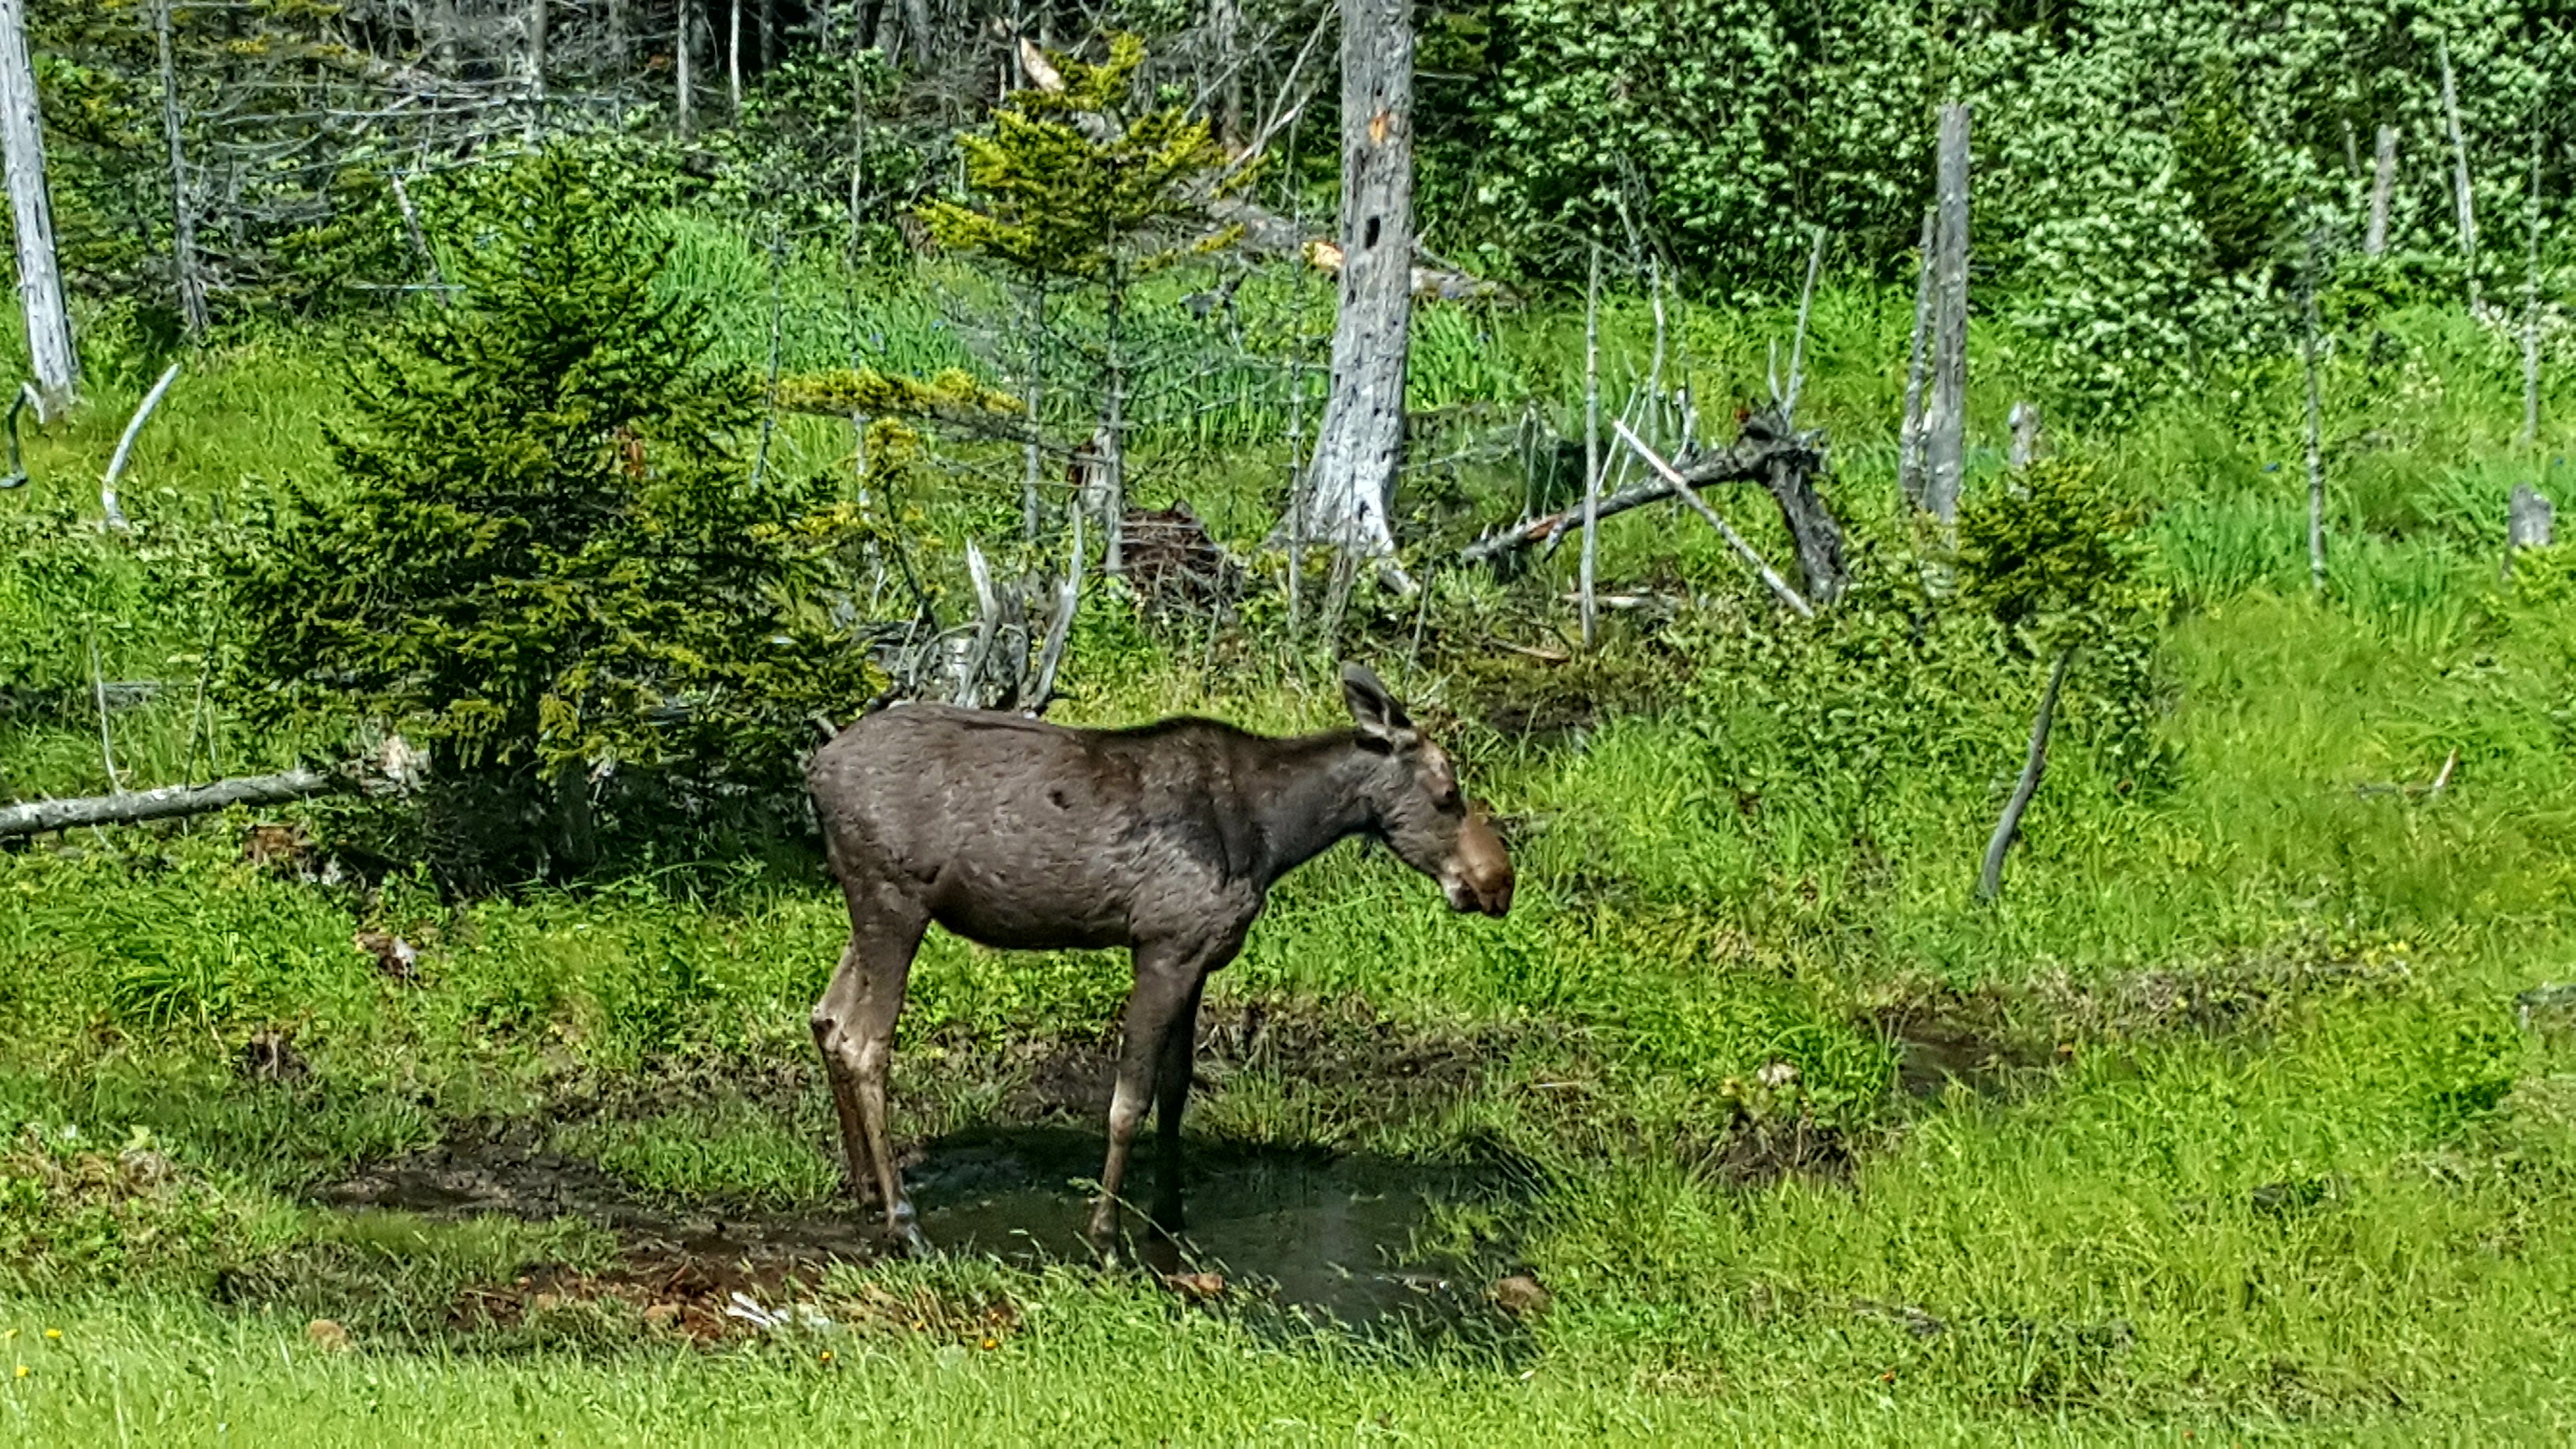 Moose standing near forest.